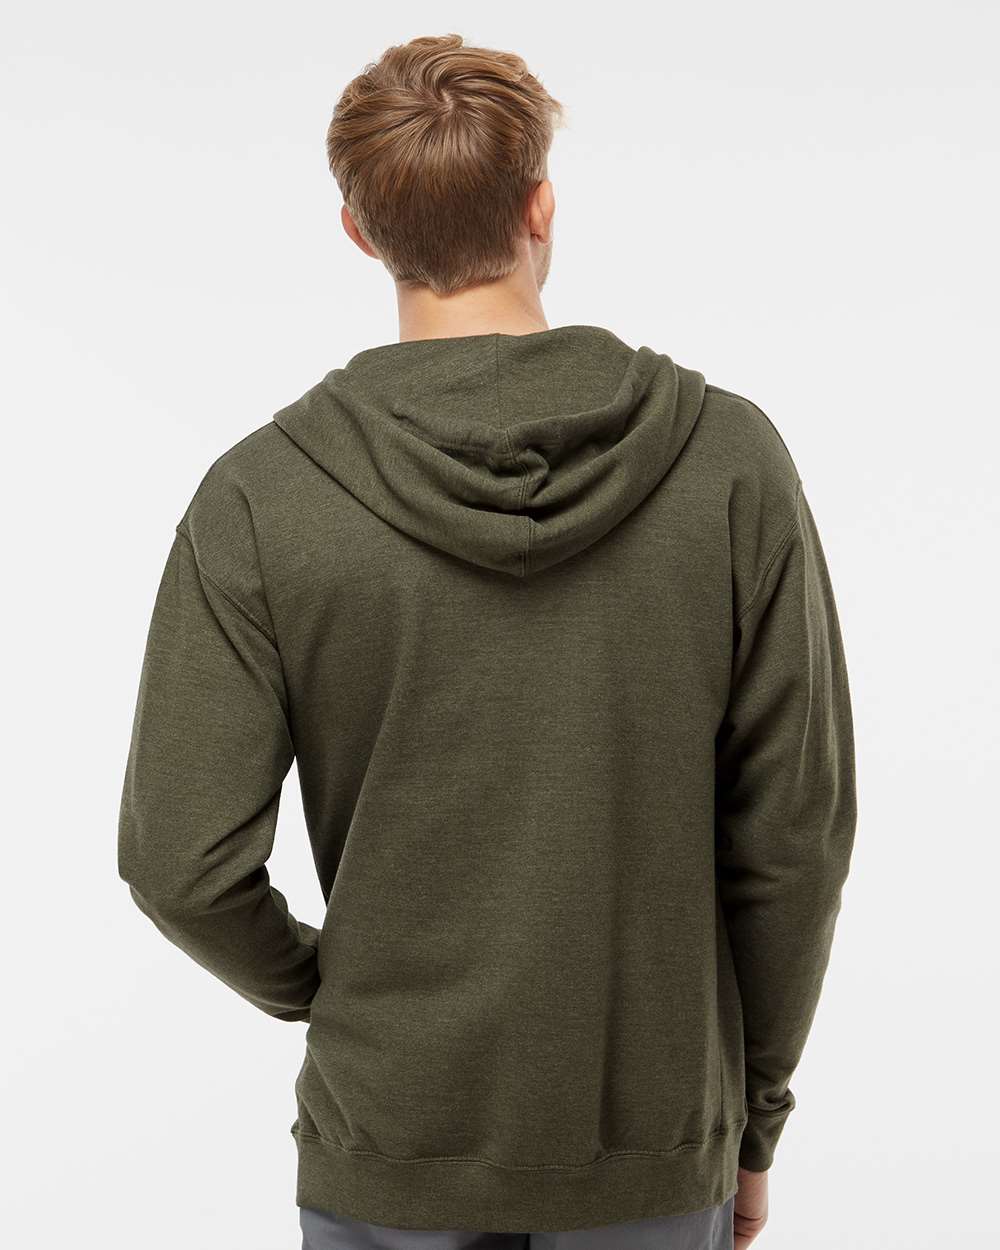 Independent Trading Co. Midweight Full-Zip Hooded Sweatshirt SS4500Z #colormdl_Army Heather